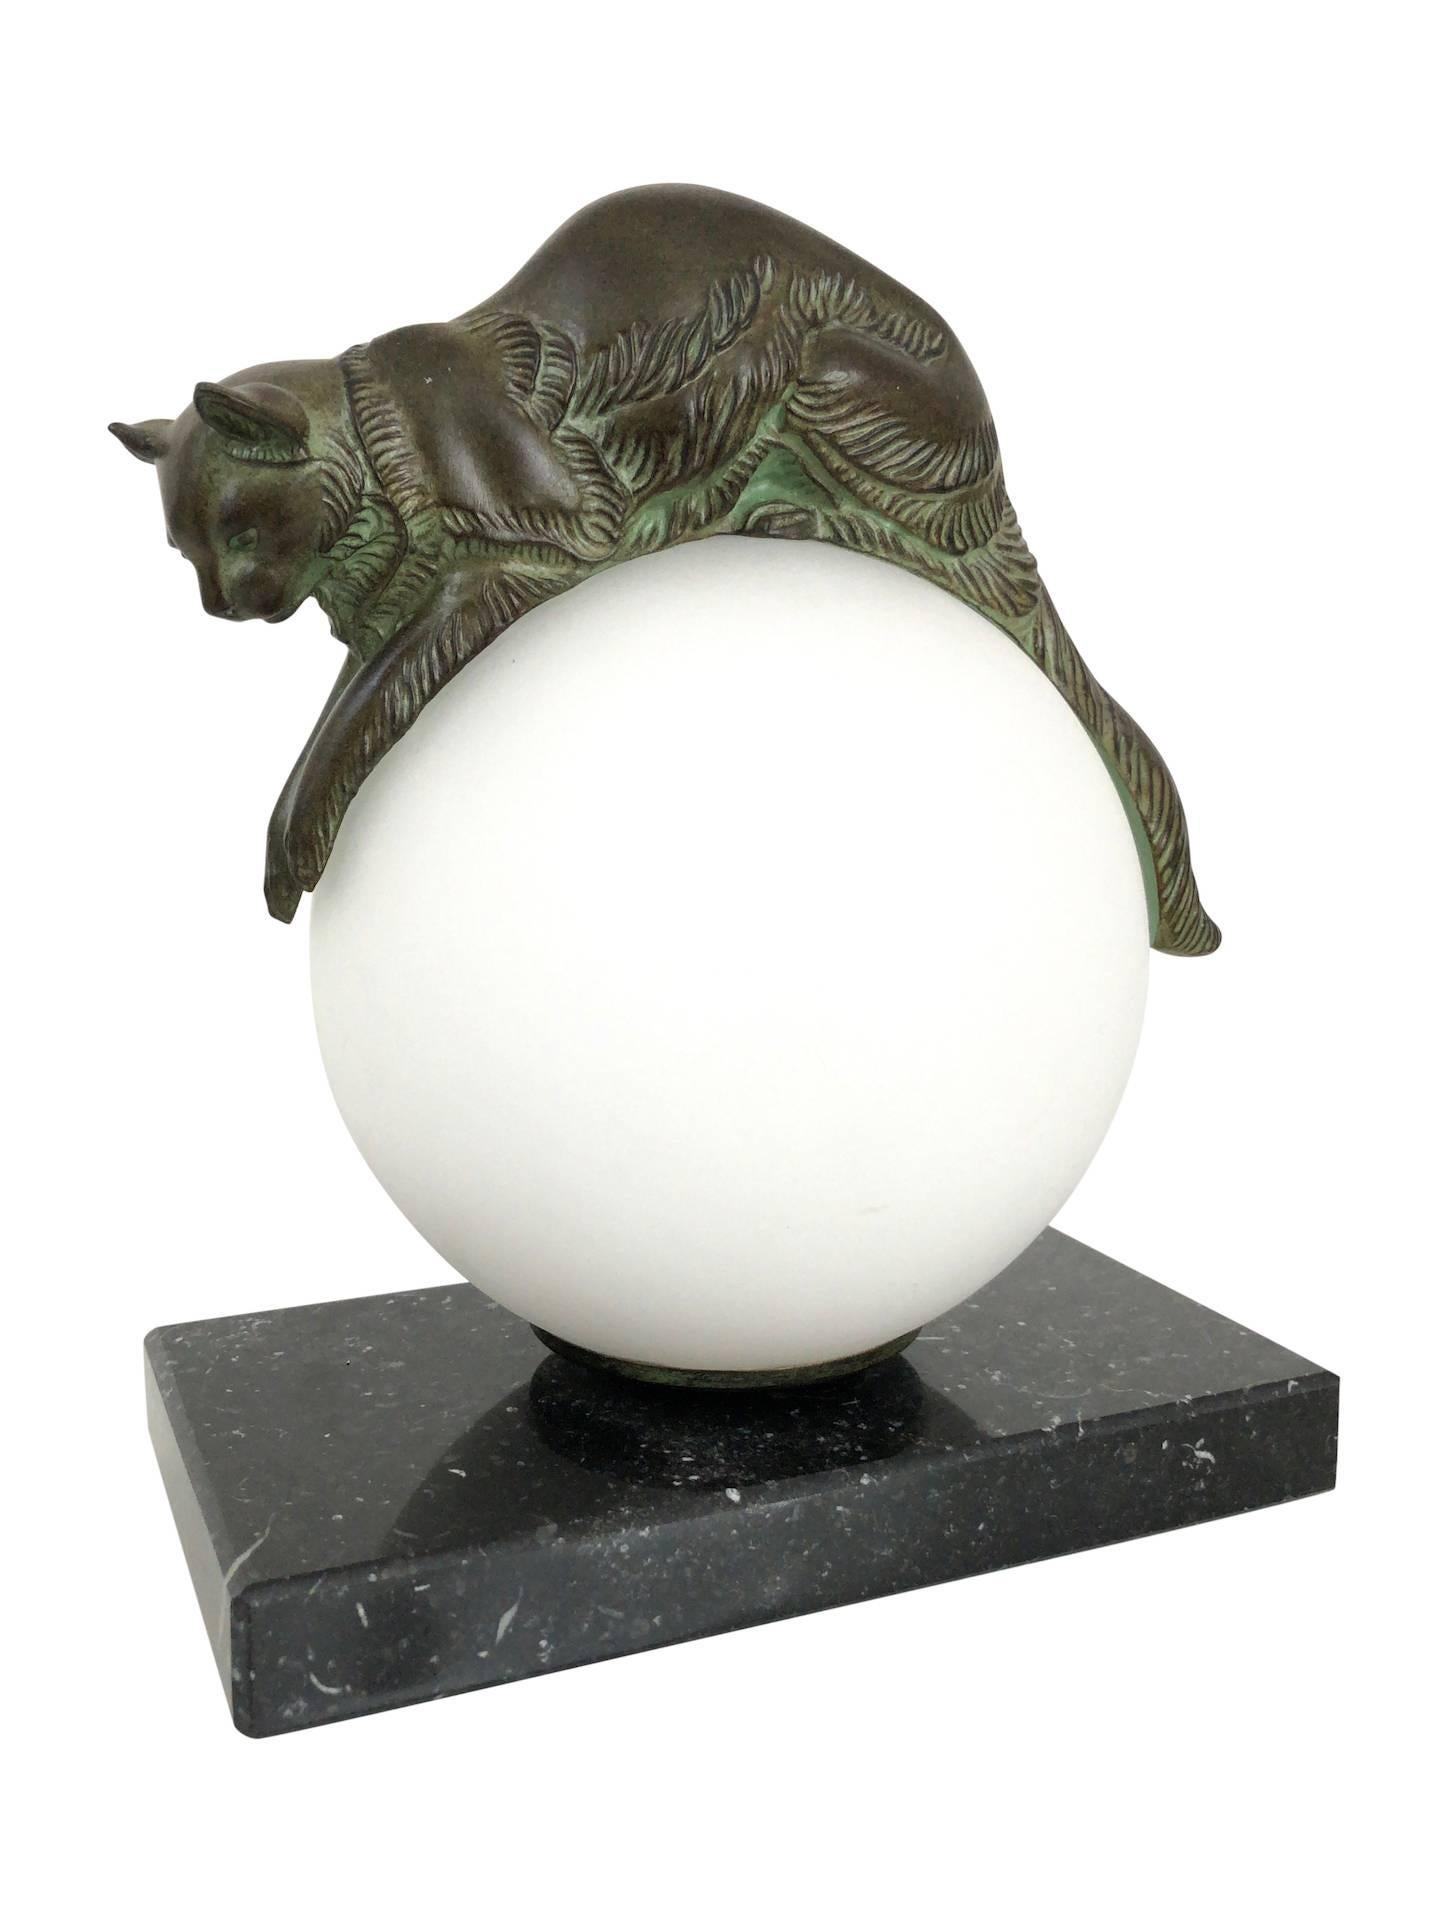 “Equilibre”
Cat keeps balance on a lighted glass ball 
Designed in France during the roaring 1920s by “Gaillard” 
Original “Max Le Verrier” 
Art Deco style, France 

Table lamp made in “Régule” (spelter)
Socle in black marble
signed
Green